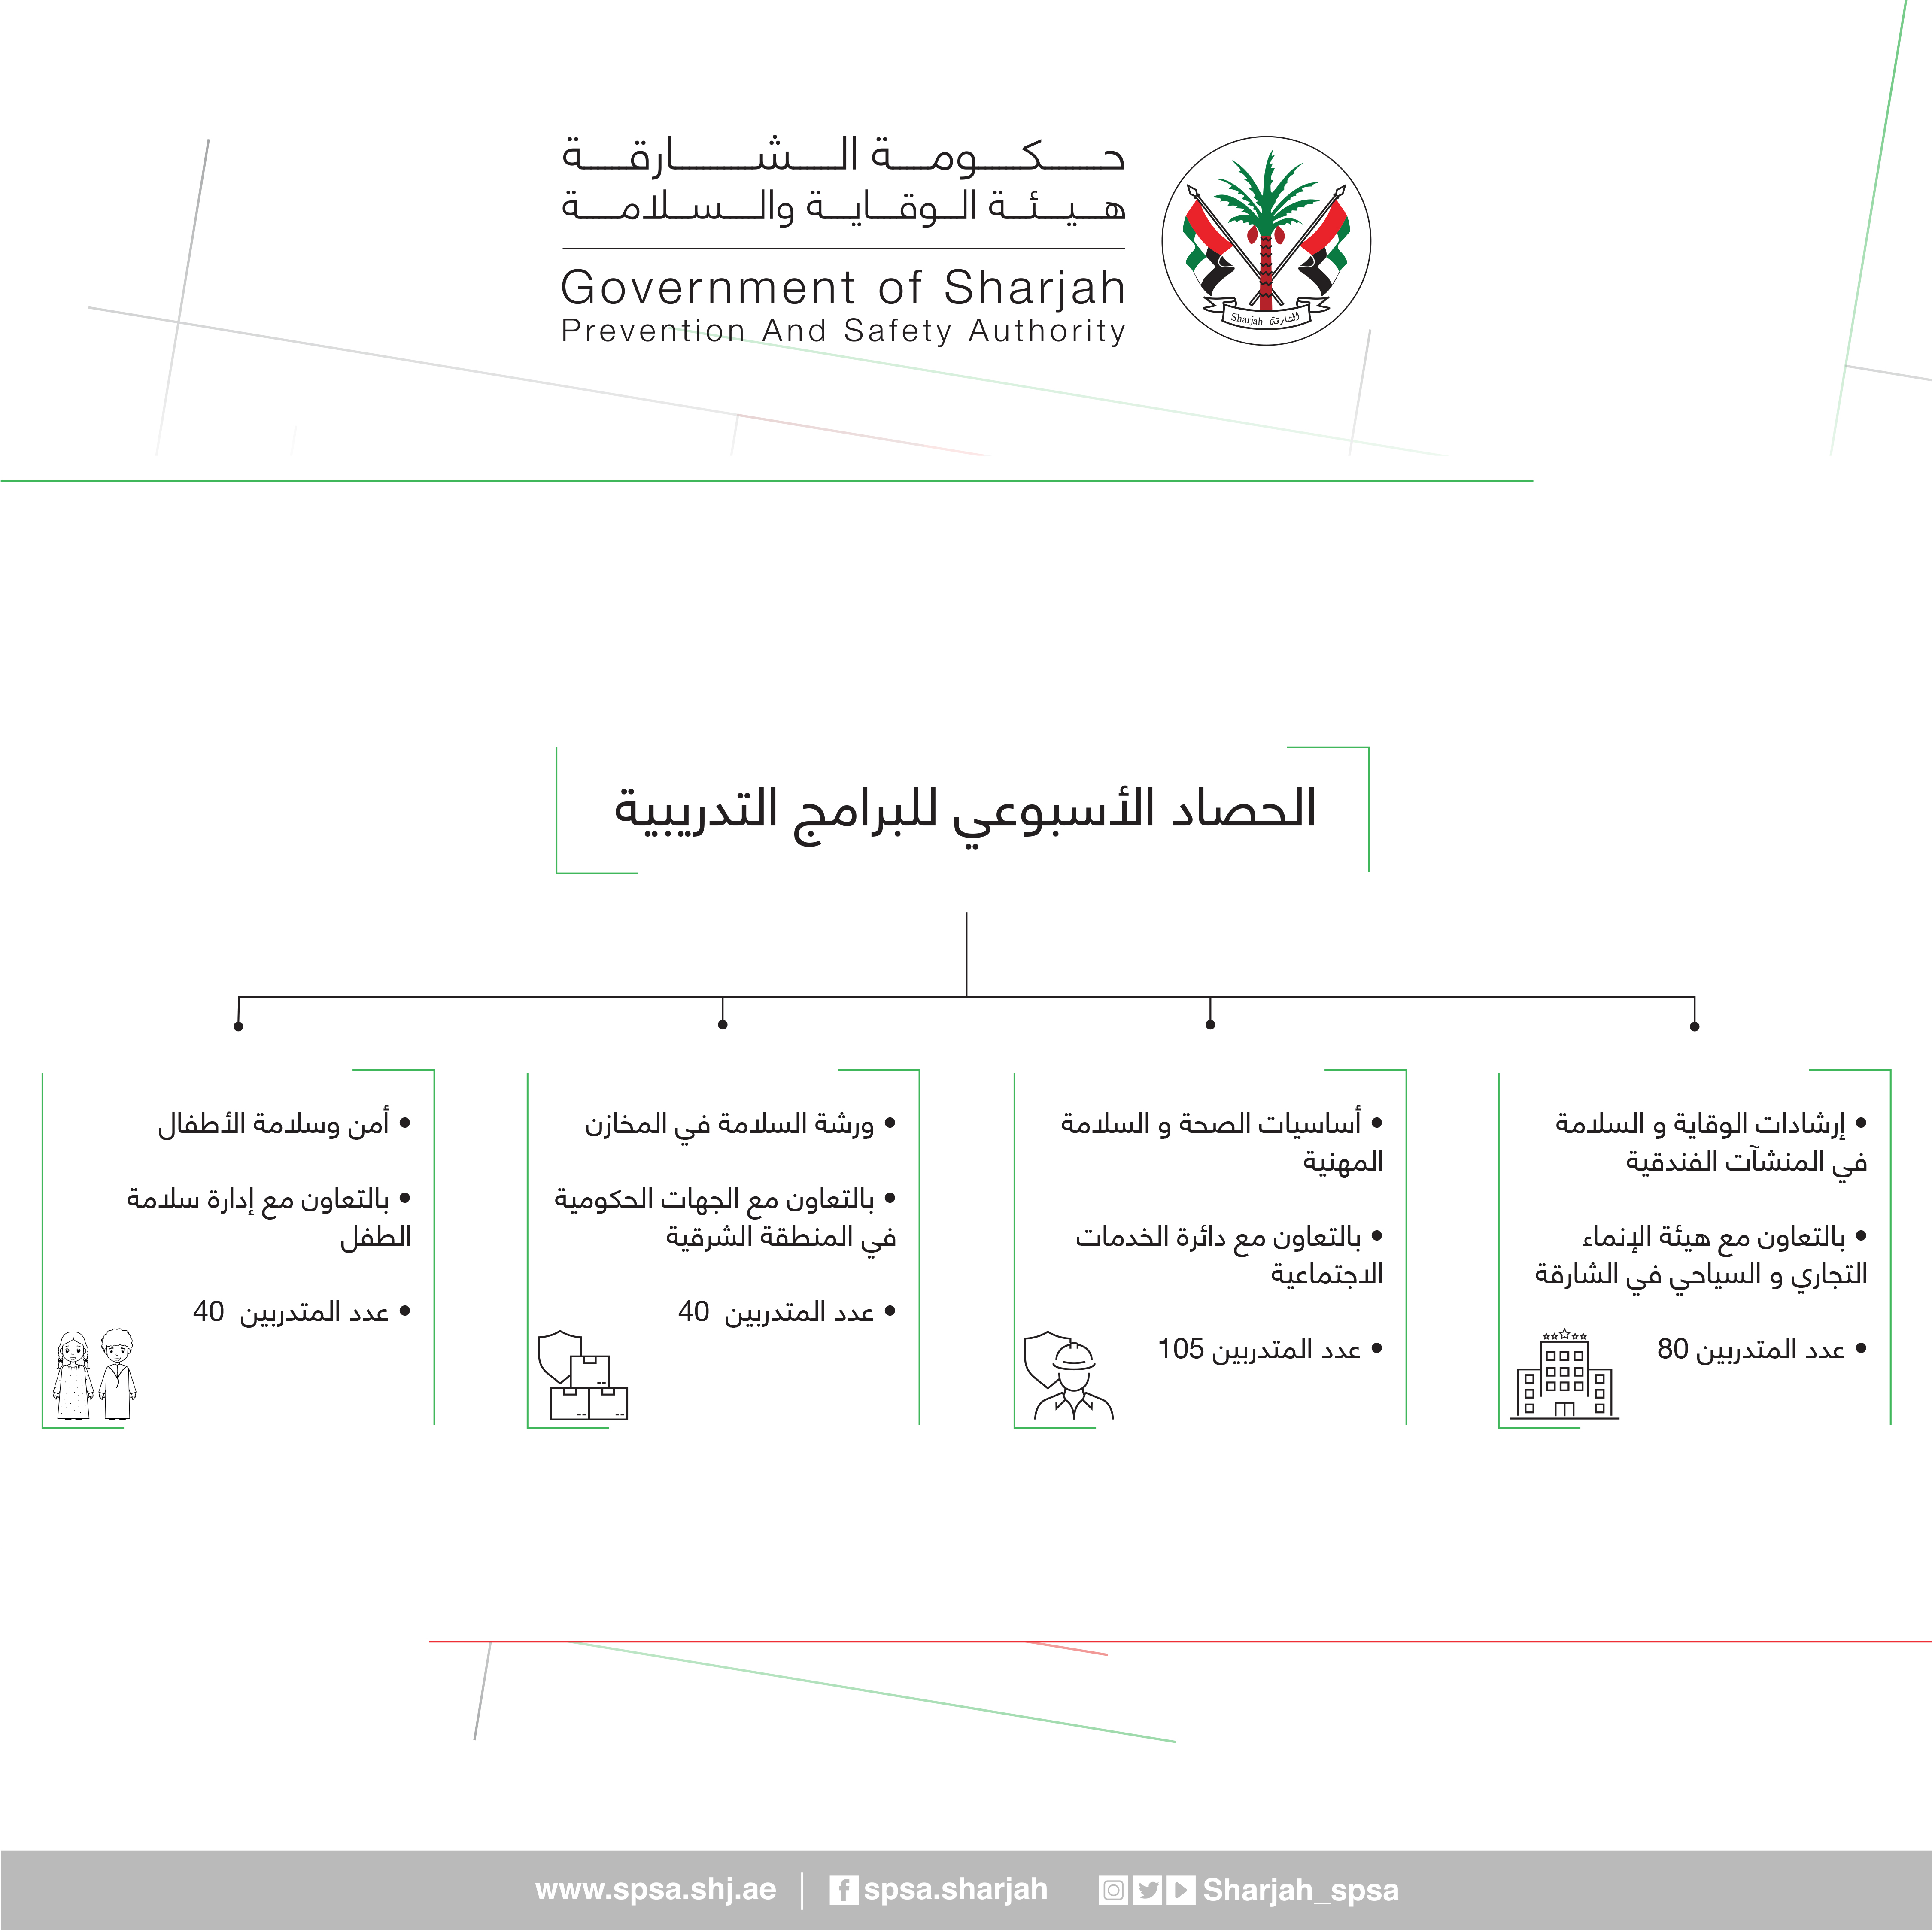 Prevention and Safety Authority in Sharjah provides training programs related to occupational safety and health